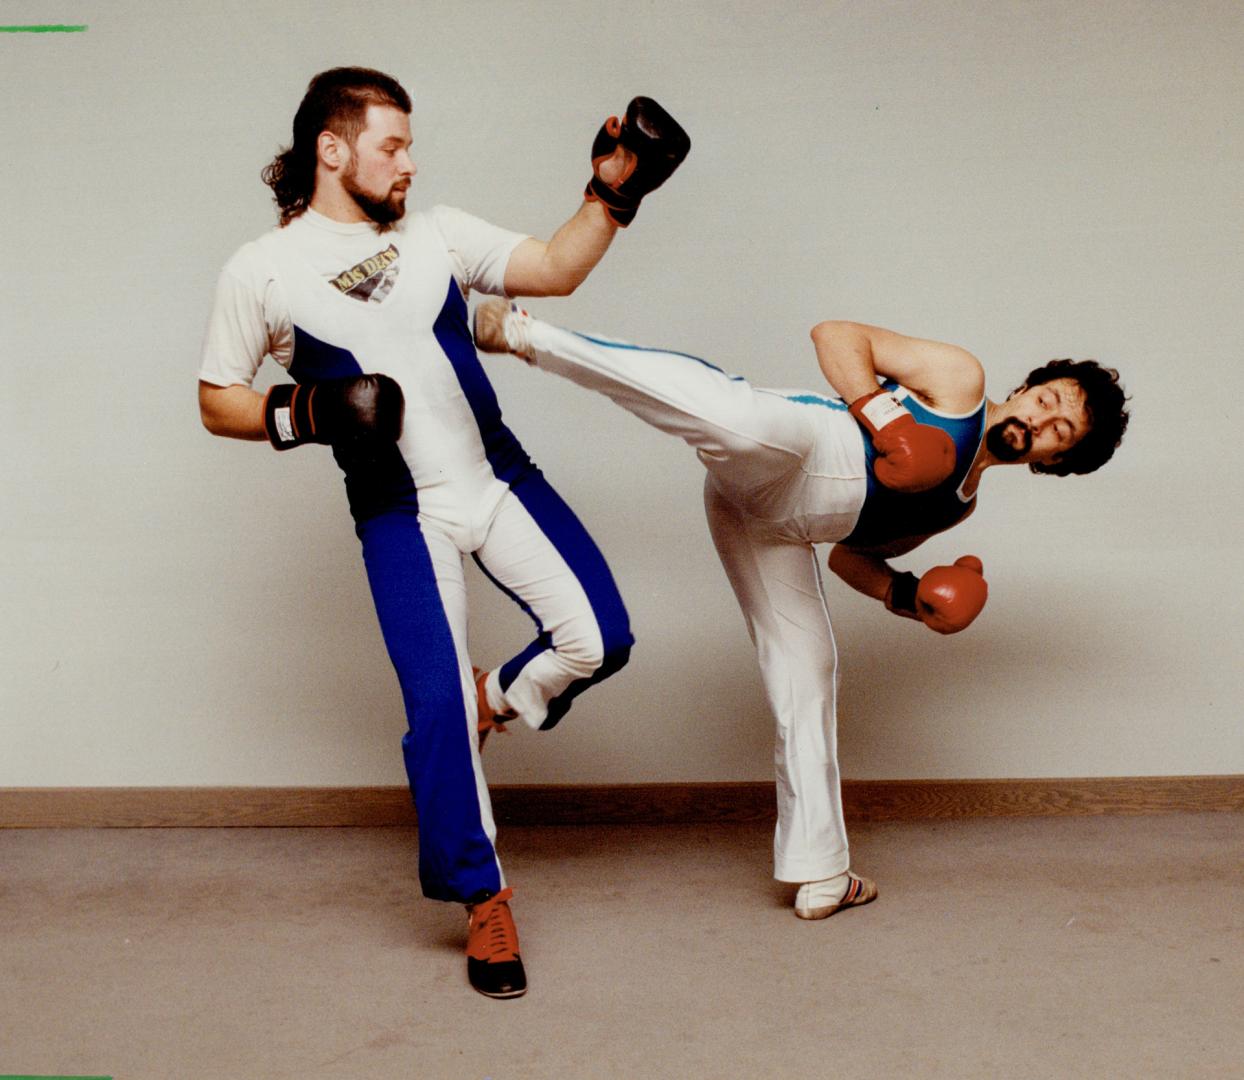 That's high-stepping Claudio Iedwab, an instructor in the sport of savate, a cousin of kickboxing, getting in a jab at Vito Brancaccio in a demonstrat(...)